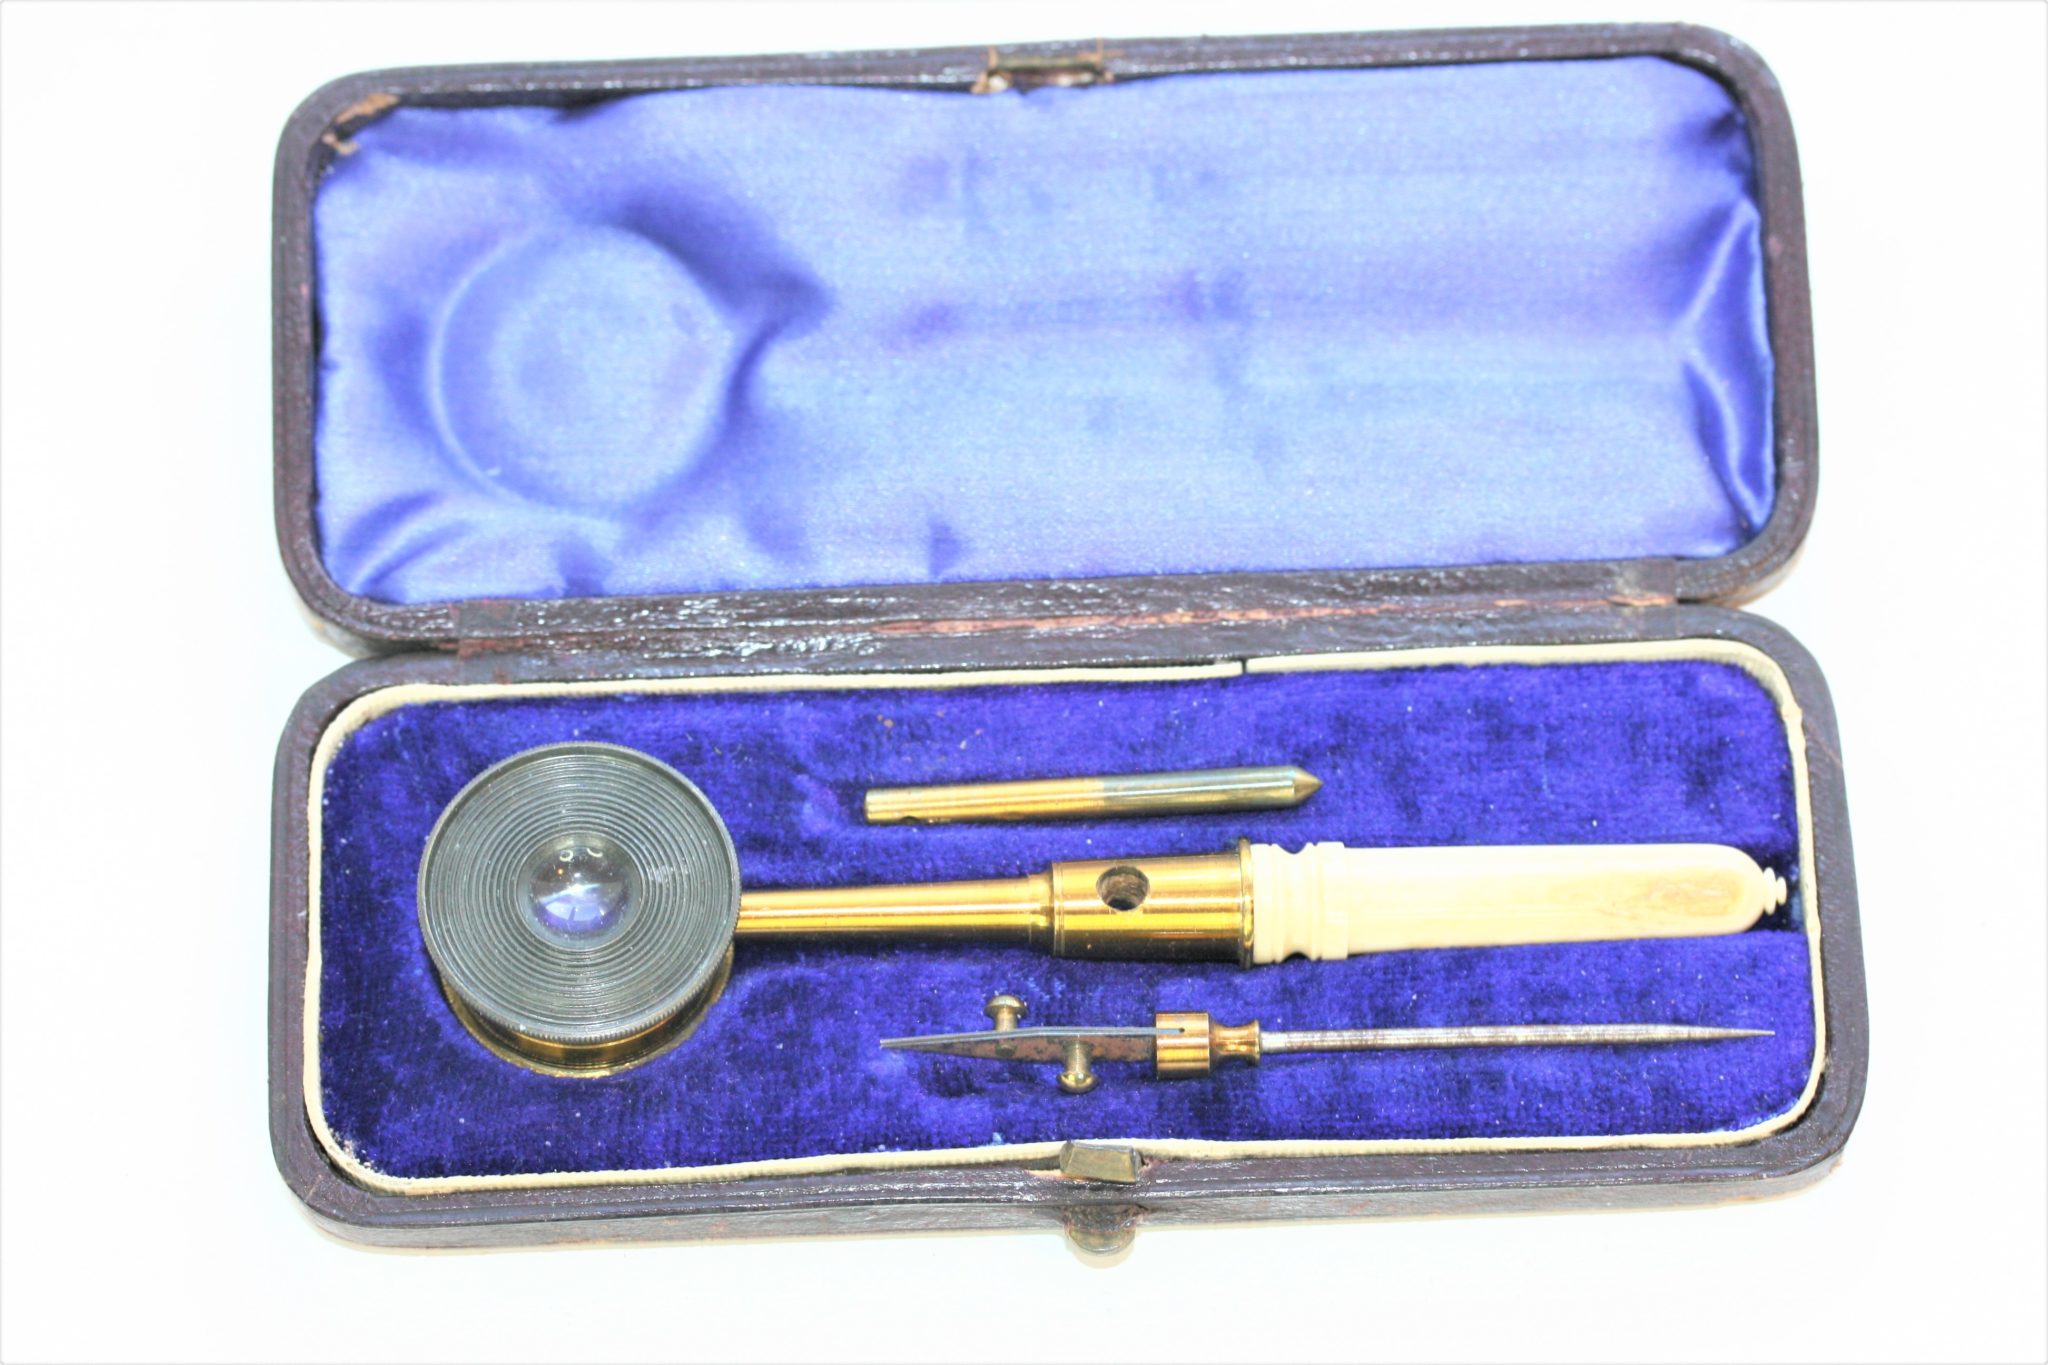 FINE COMPLETE POCKET MICROSCOPE IN ITS ORIG. CASE ,HANDLE IS BONE , GOOD CONDITION